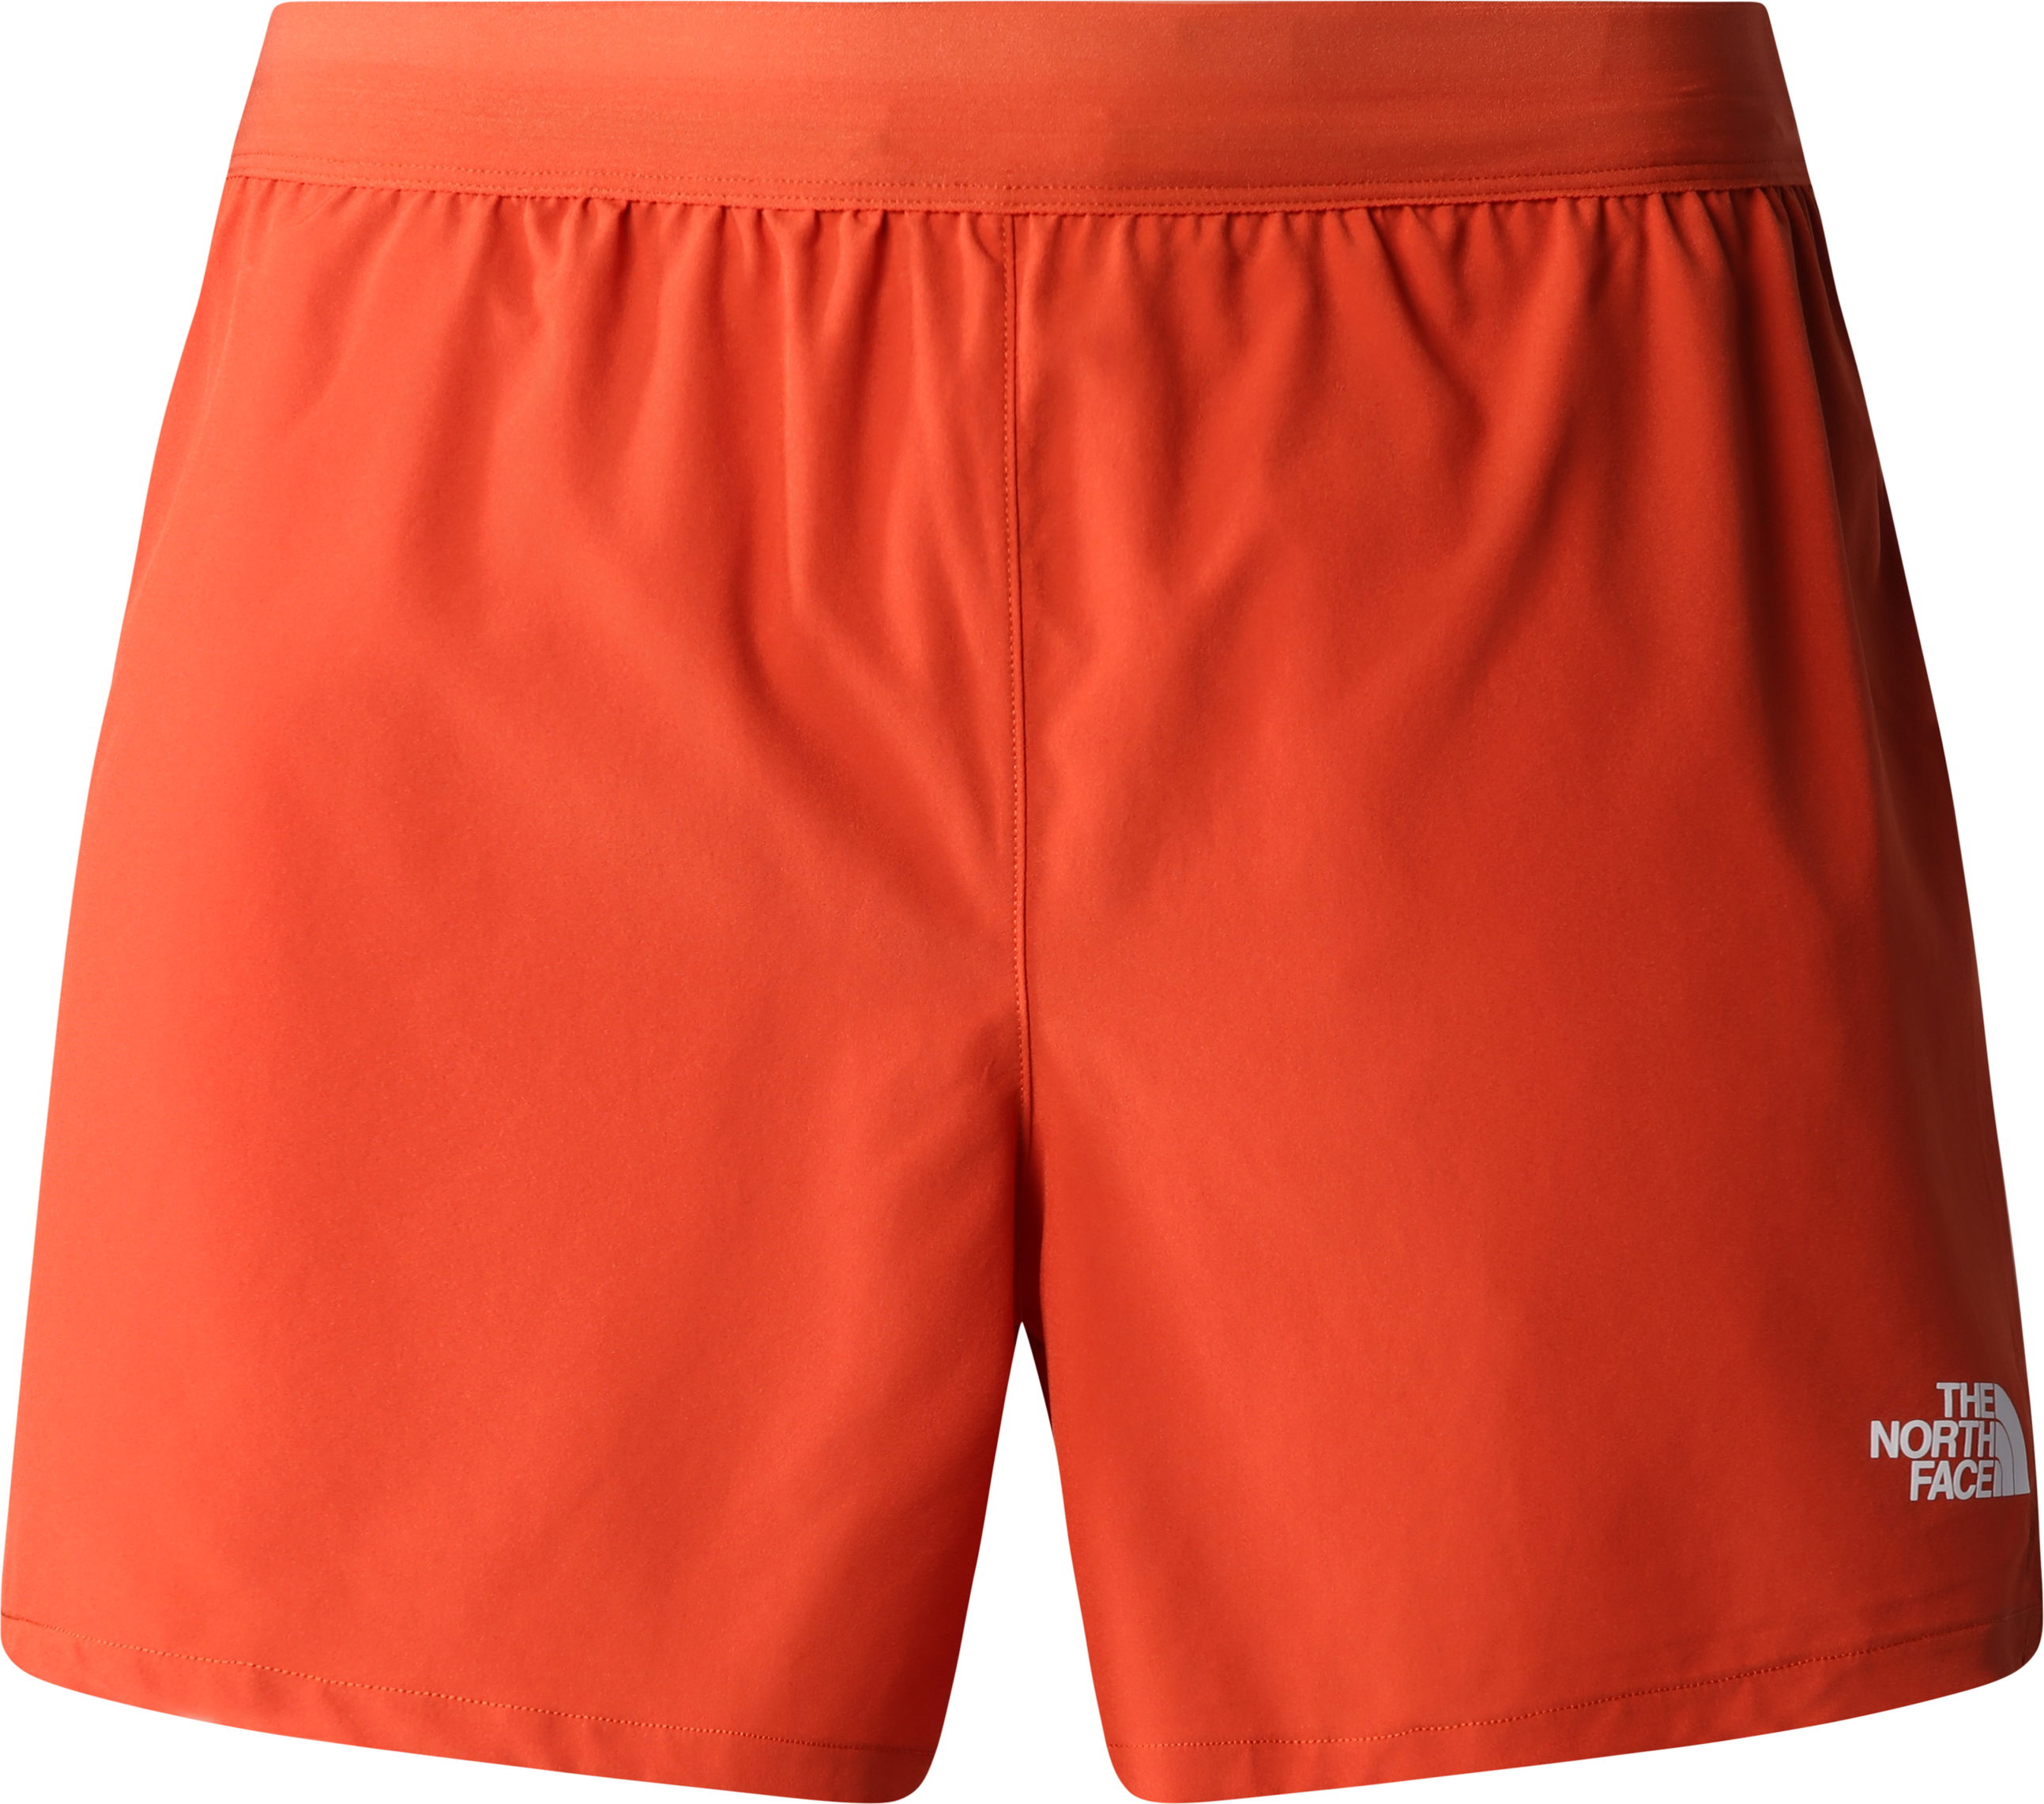 The North Face Men’s Sunriser Shorts RUSTED BRONZE